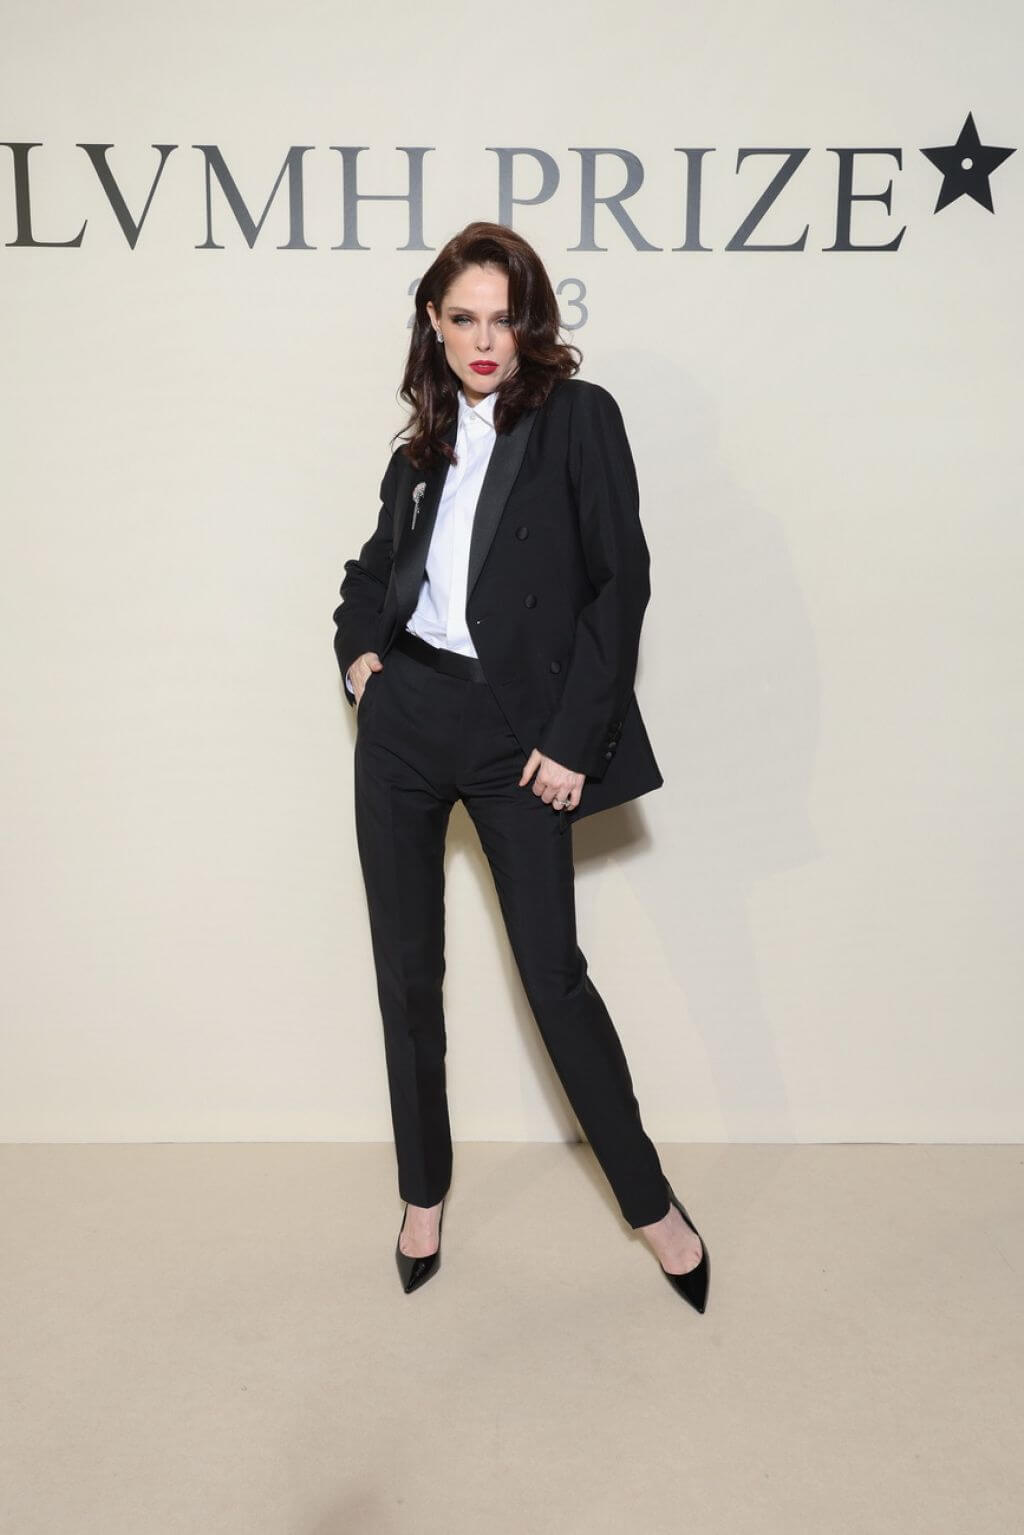 Coco Rocha In White Shirt and Black Pants With Blazer Outfits 